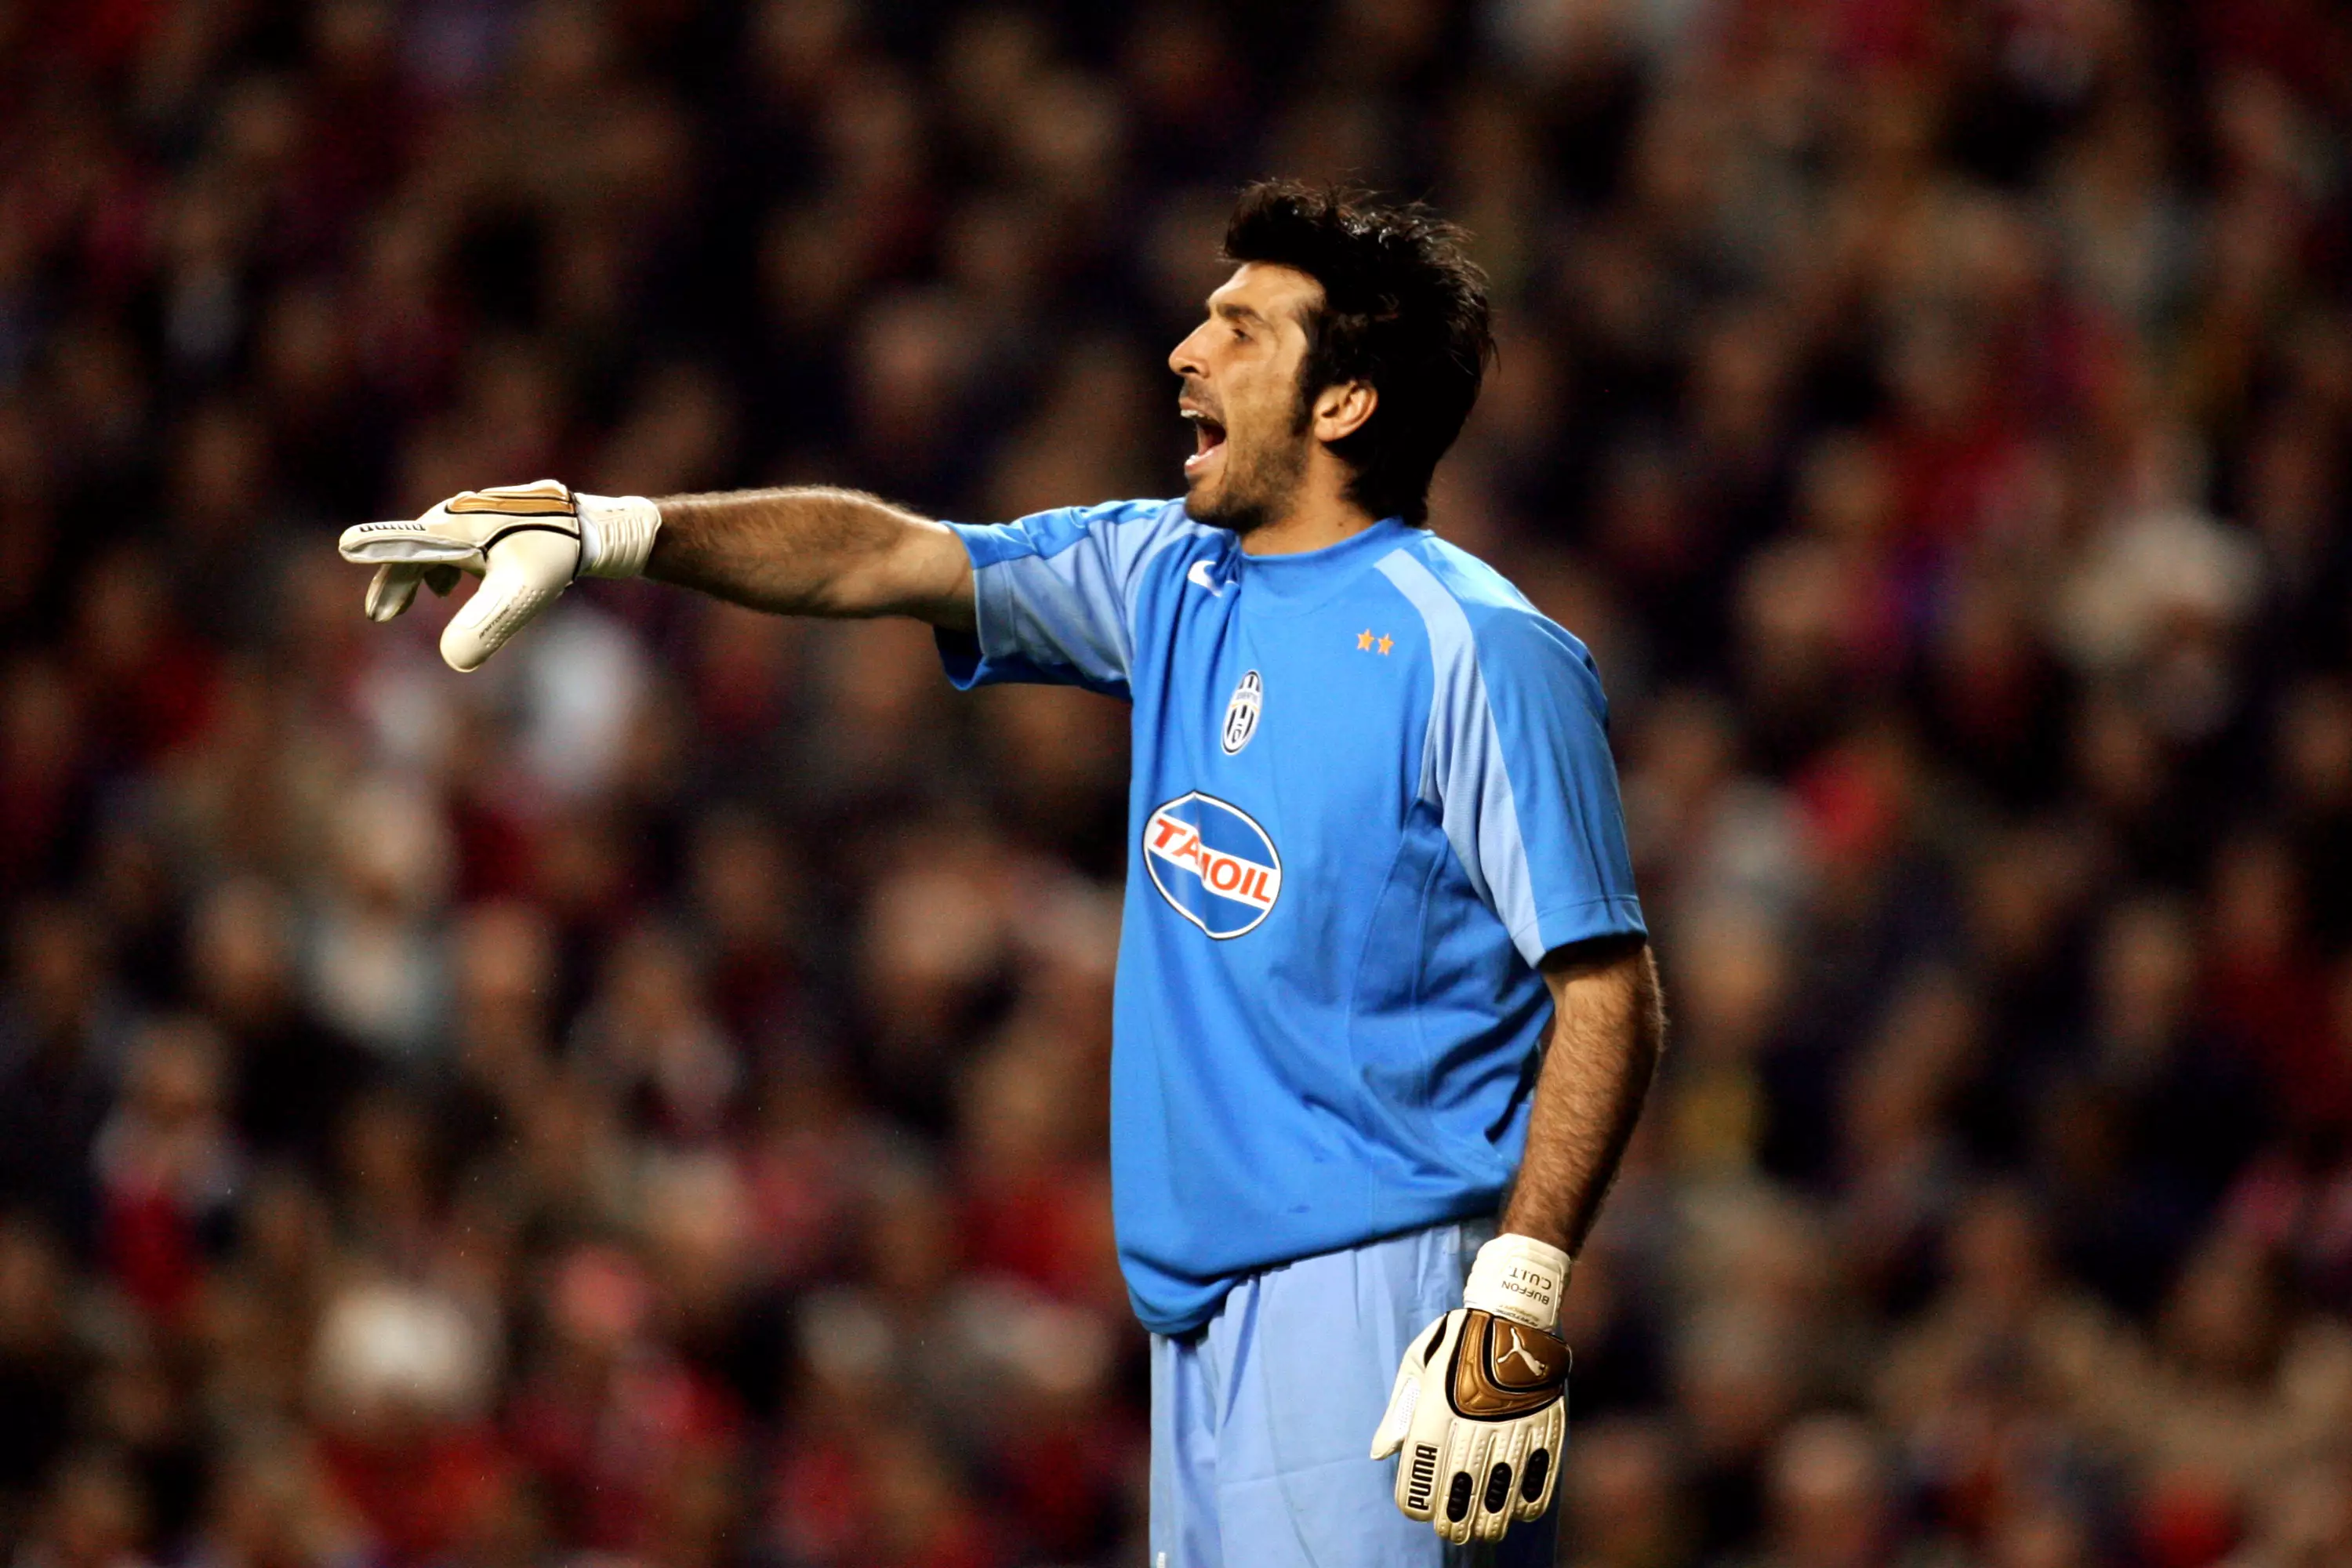 Buffon playing for Juventus at Anfield in 2005. Image: PA Images